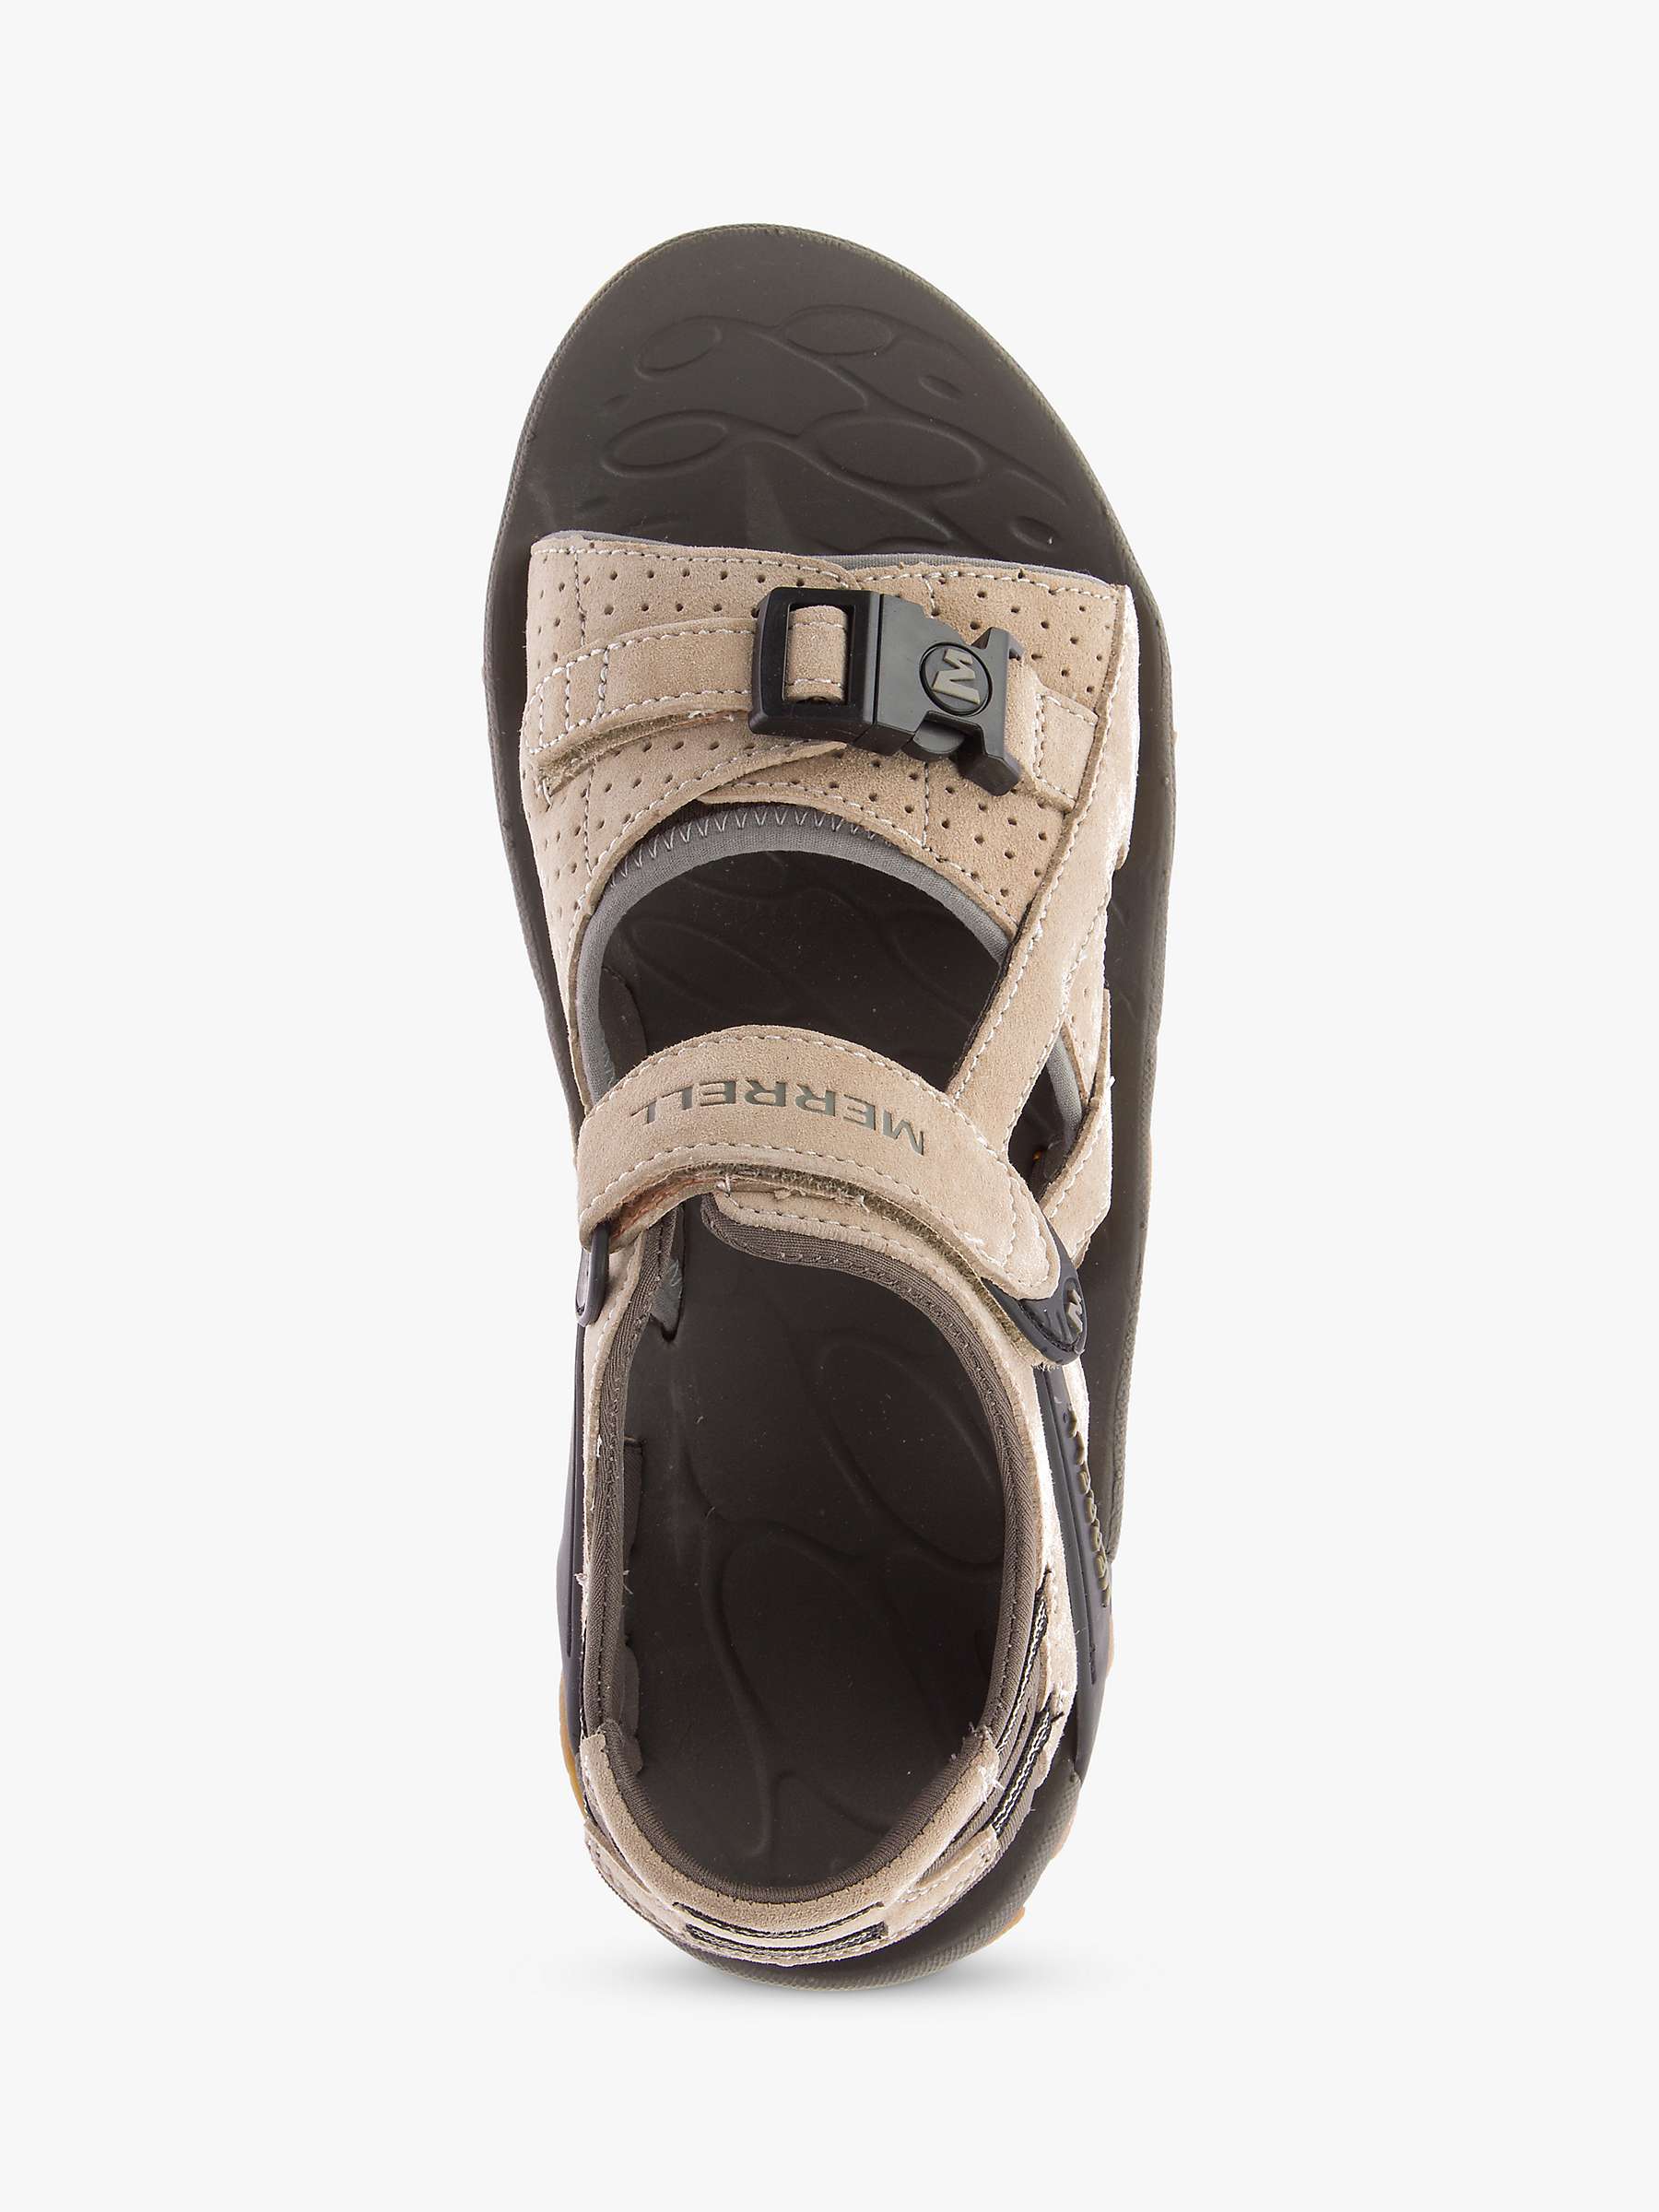 Buy Merrell Kahuna 3 Women's Sandals, Classic Taupe Online at johnlewis.com